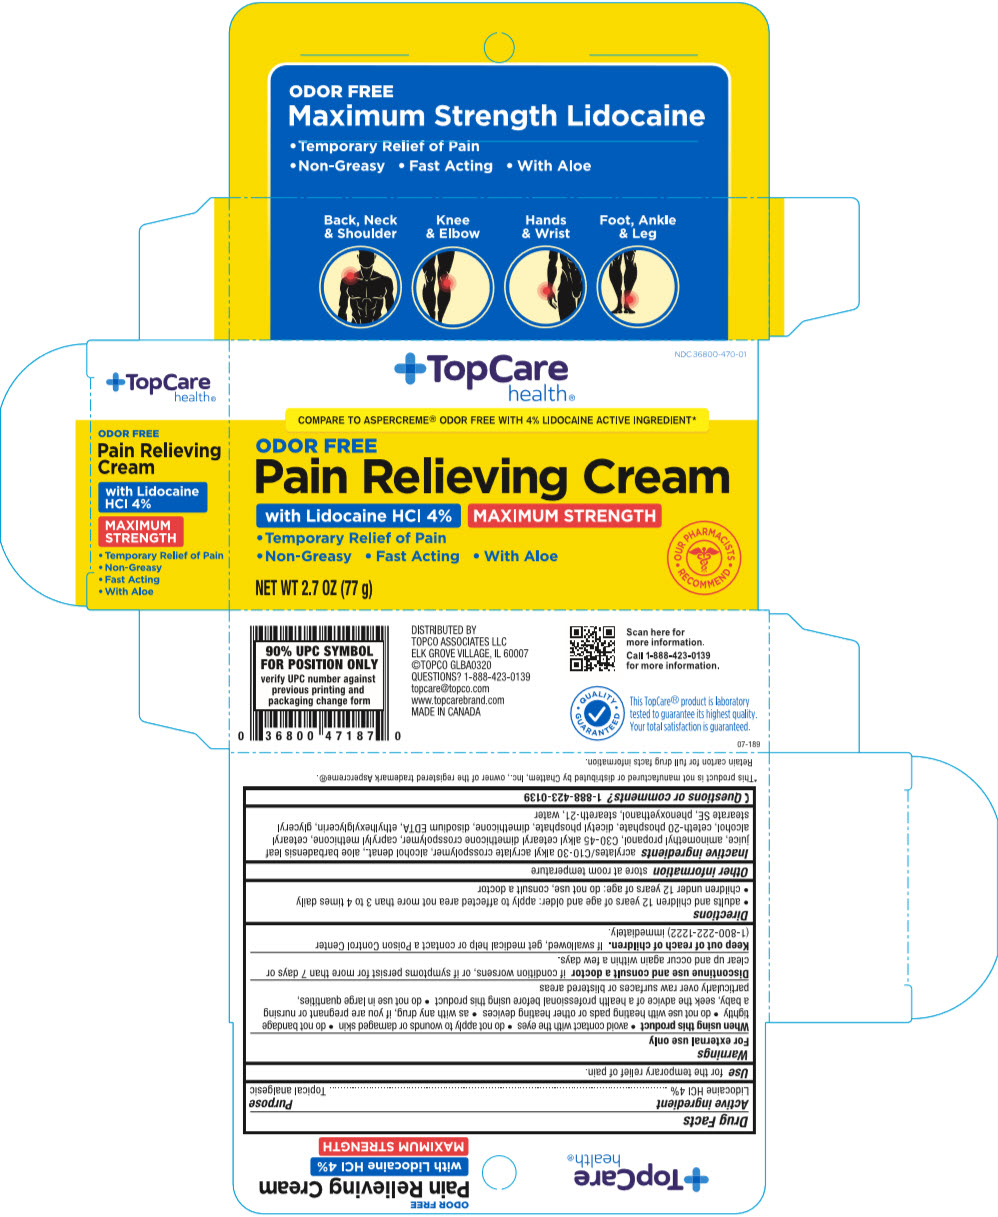 Drug-free Pain Relief - Pain Relief for Necks, Knees & More